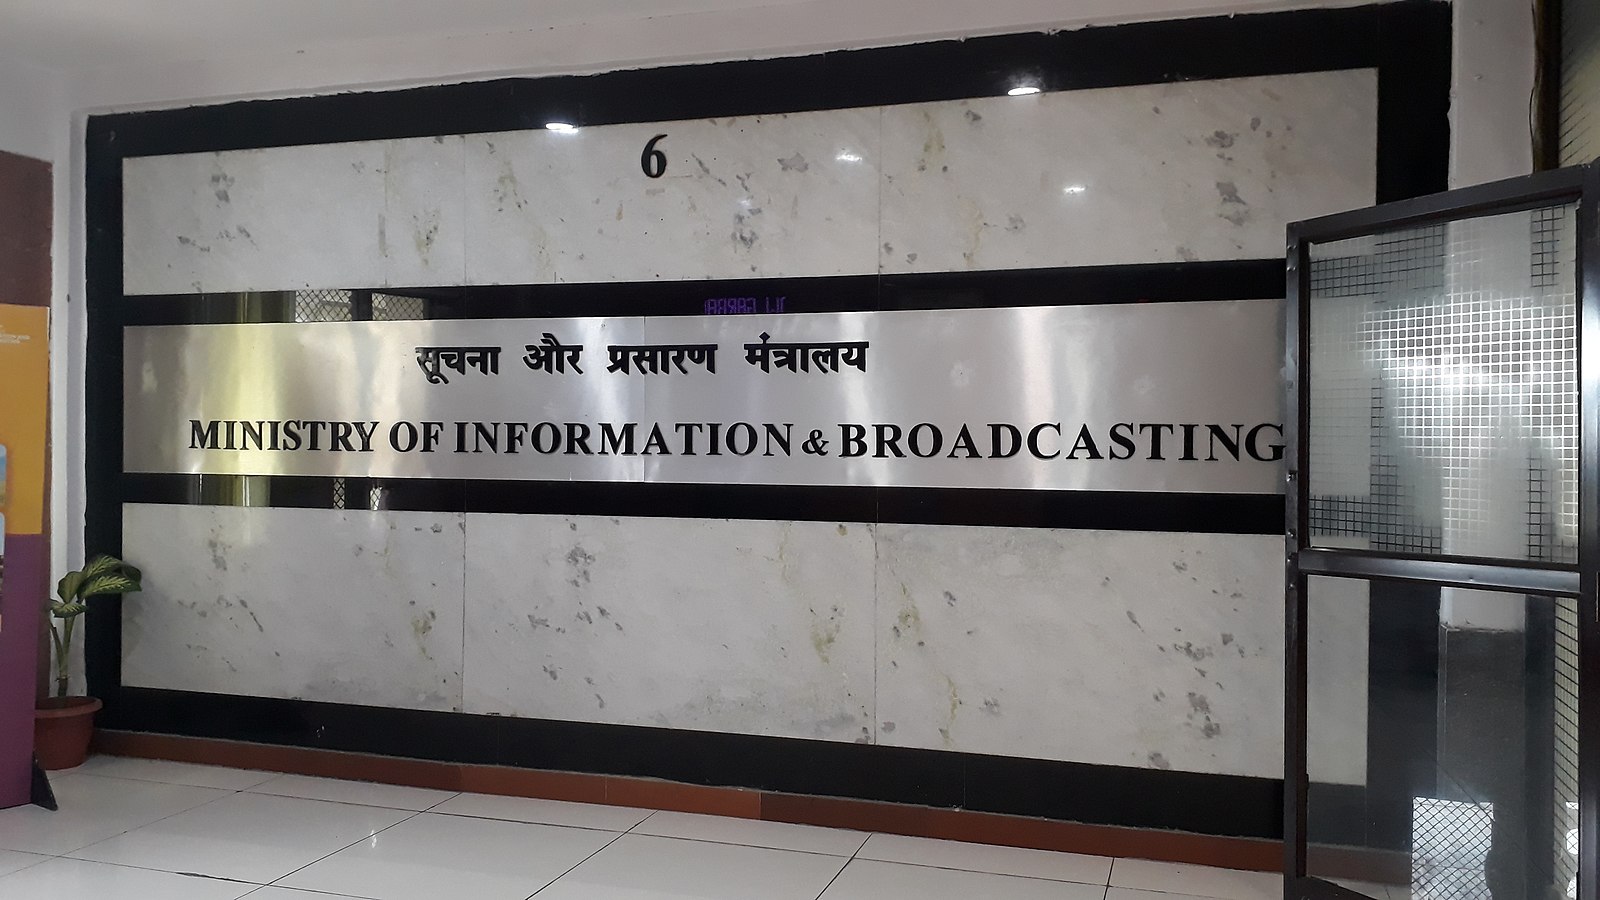 Editors Guild of India says new national broadcasting legislation could lead to unconstitutonal censorship of news outlets